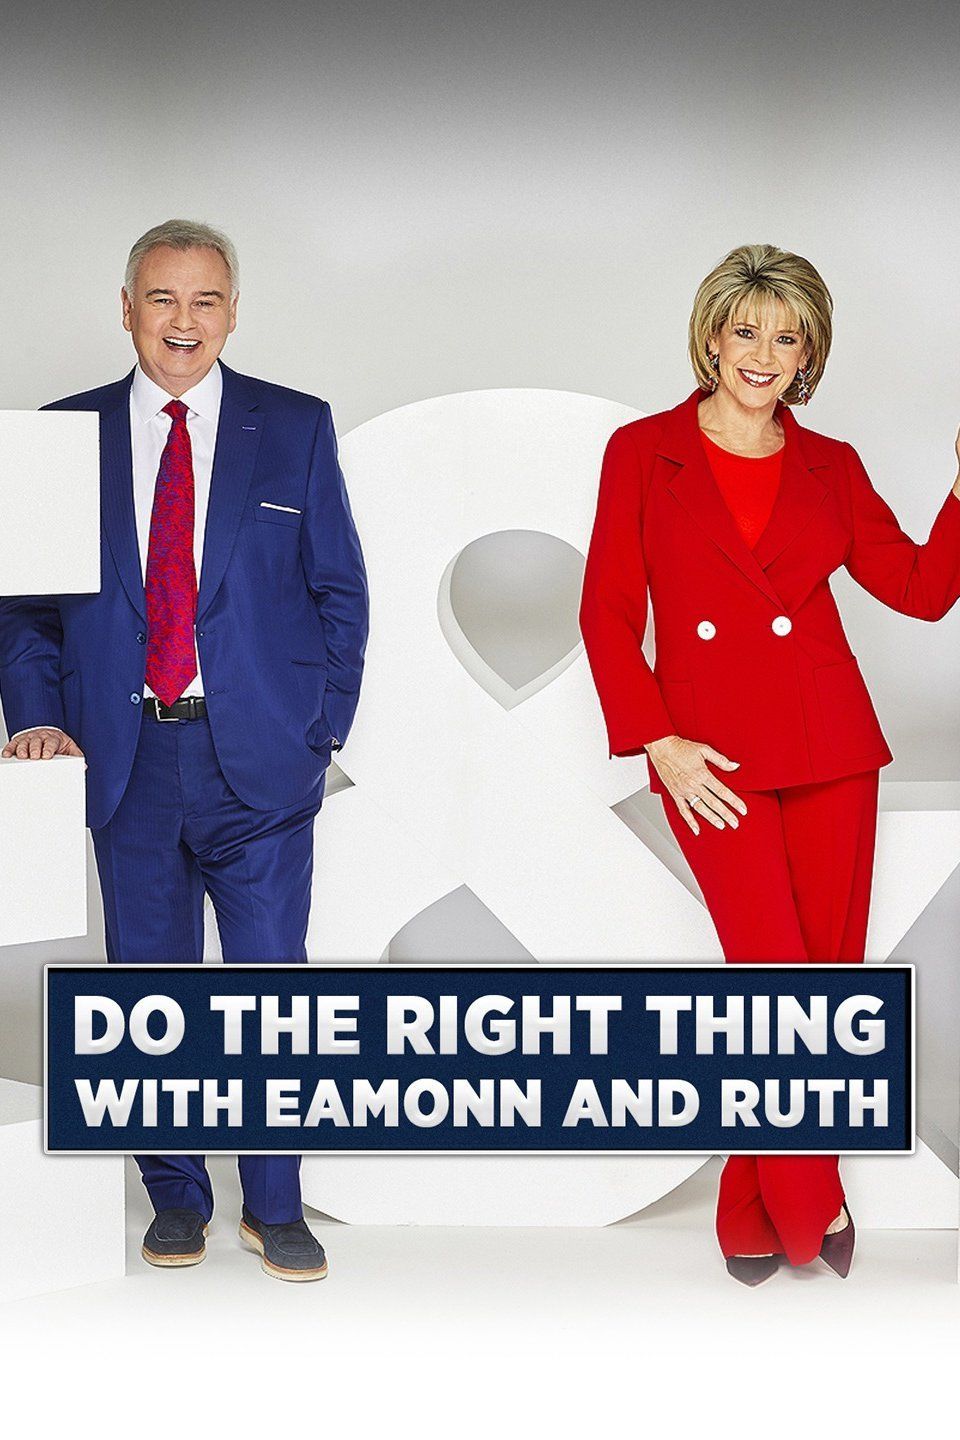 Do the Right Thing with Eamonn & Ruth ne zaman